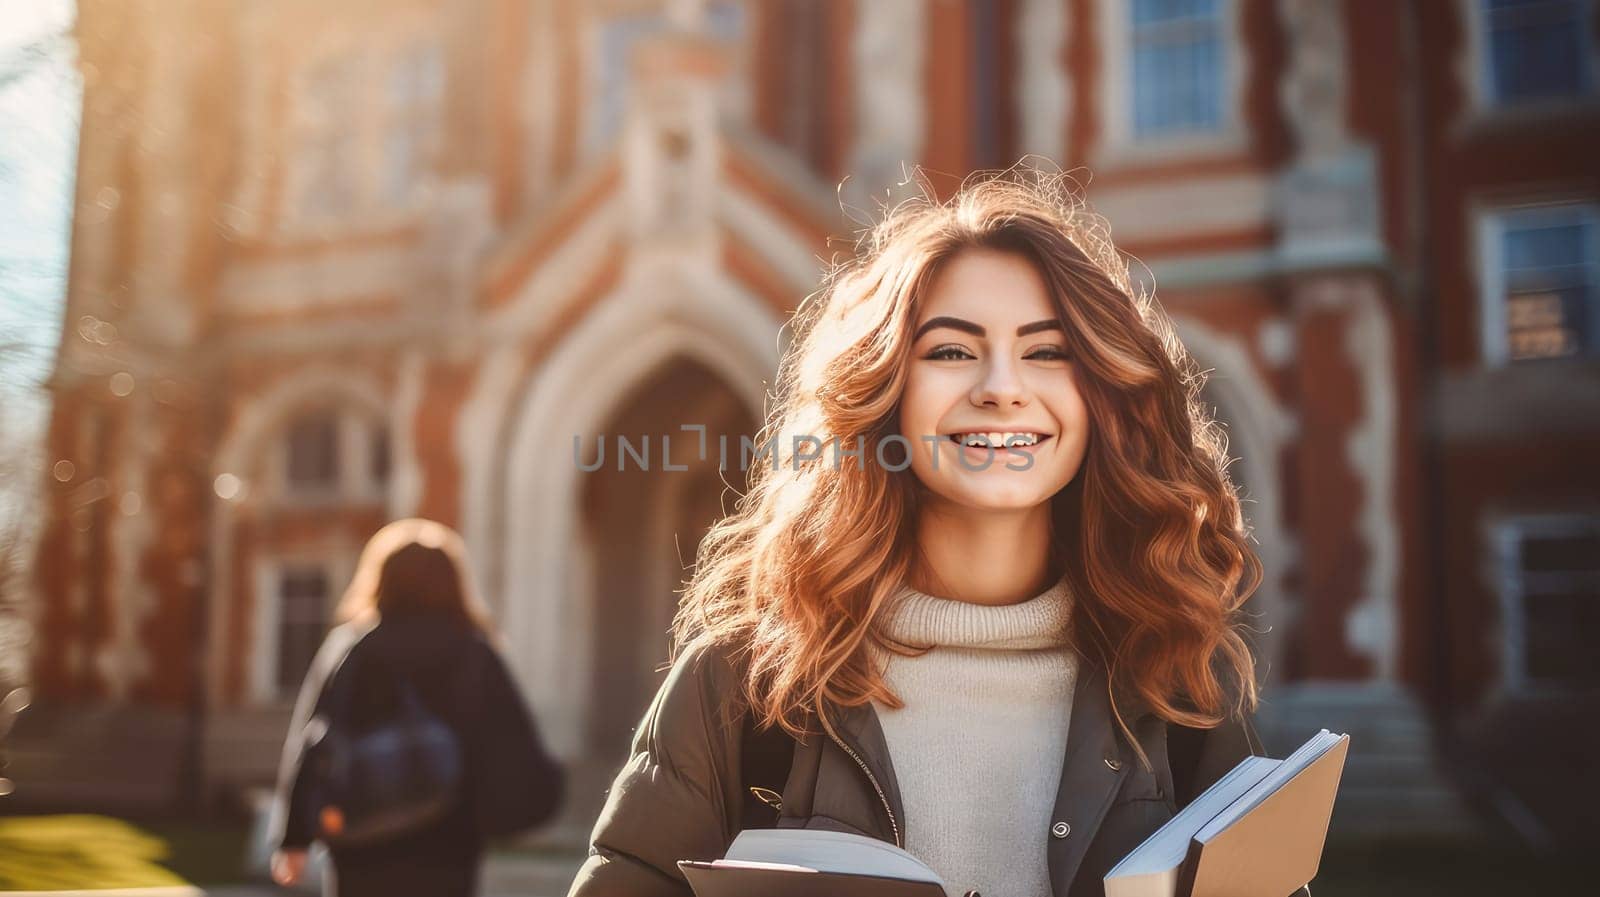 A smiling young girl sits on the steps of an educational institution. by Alla_Yurtayeva